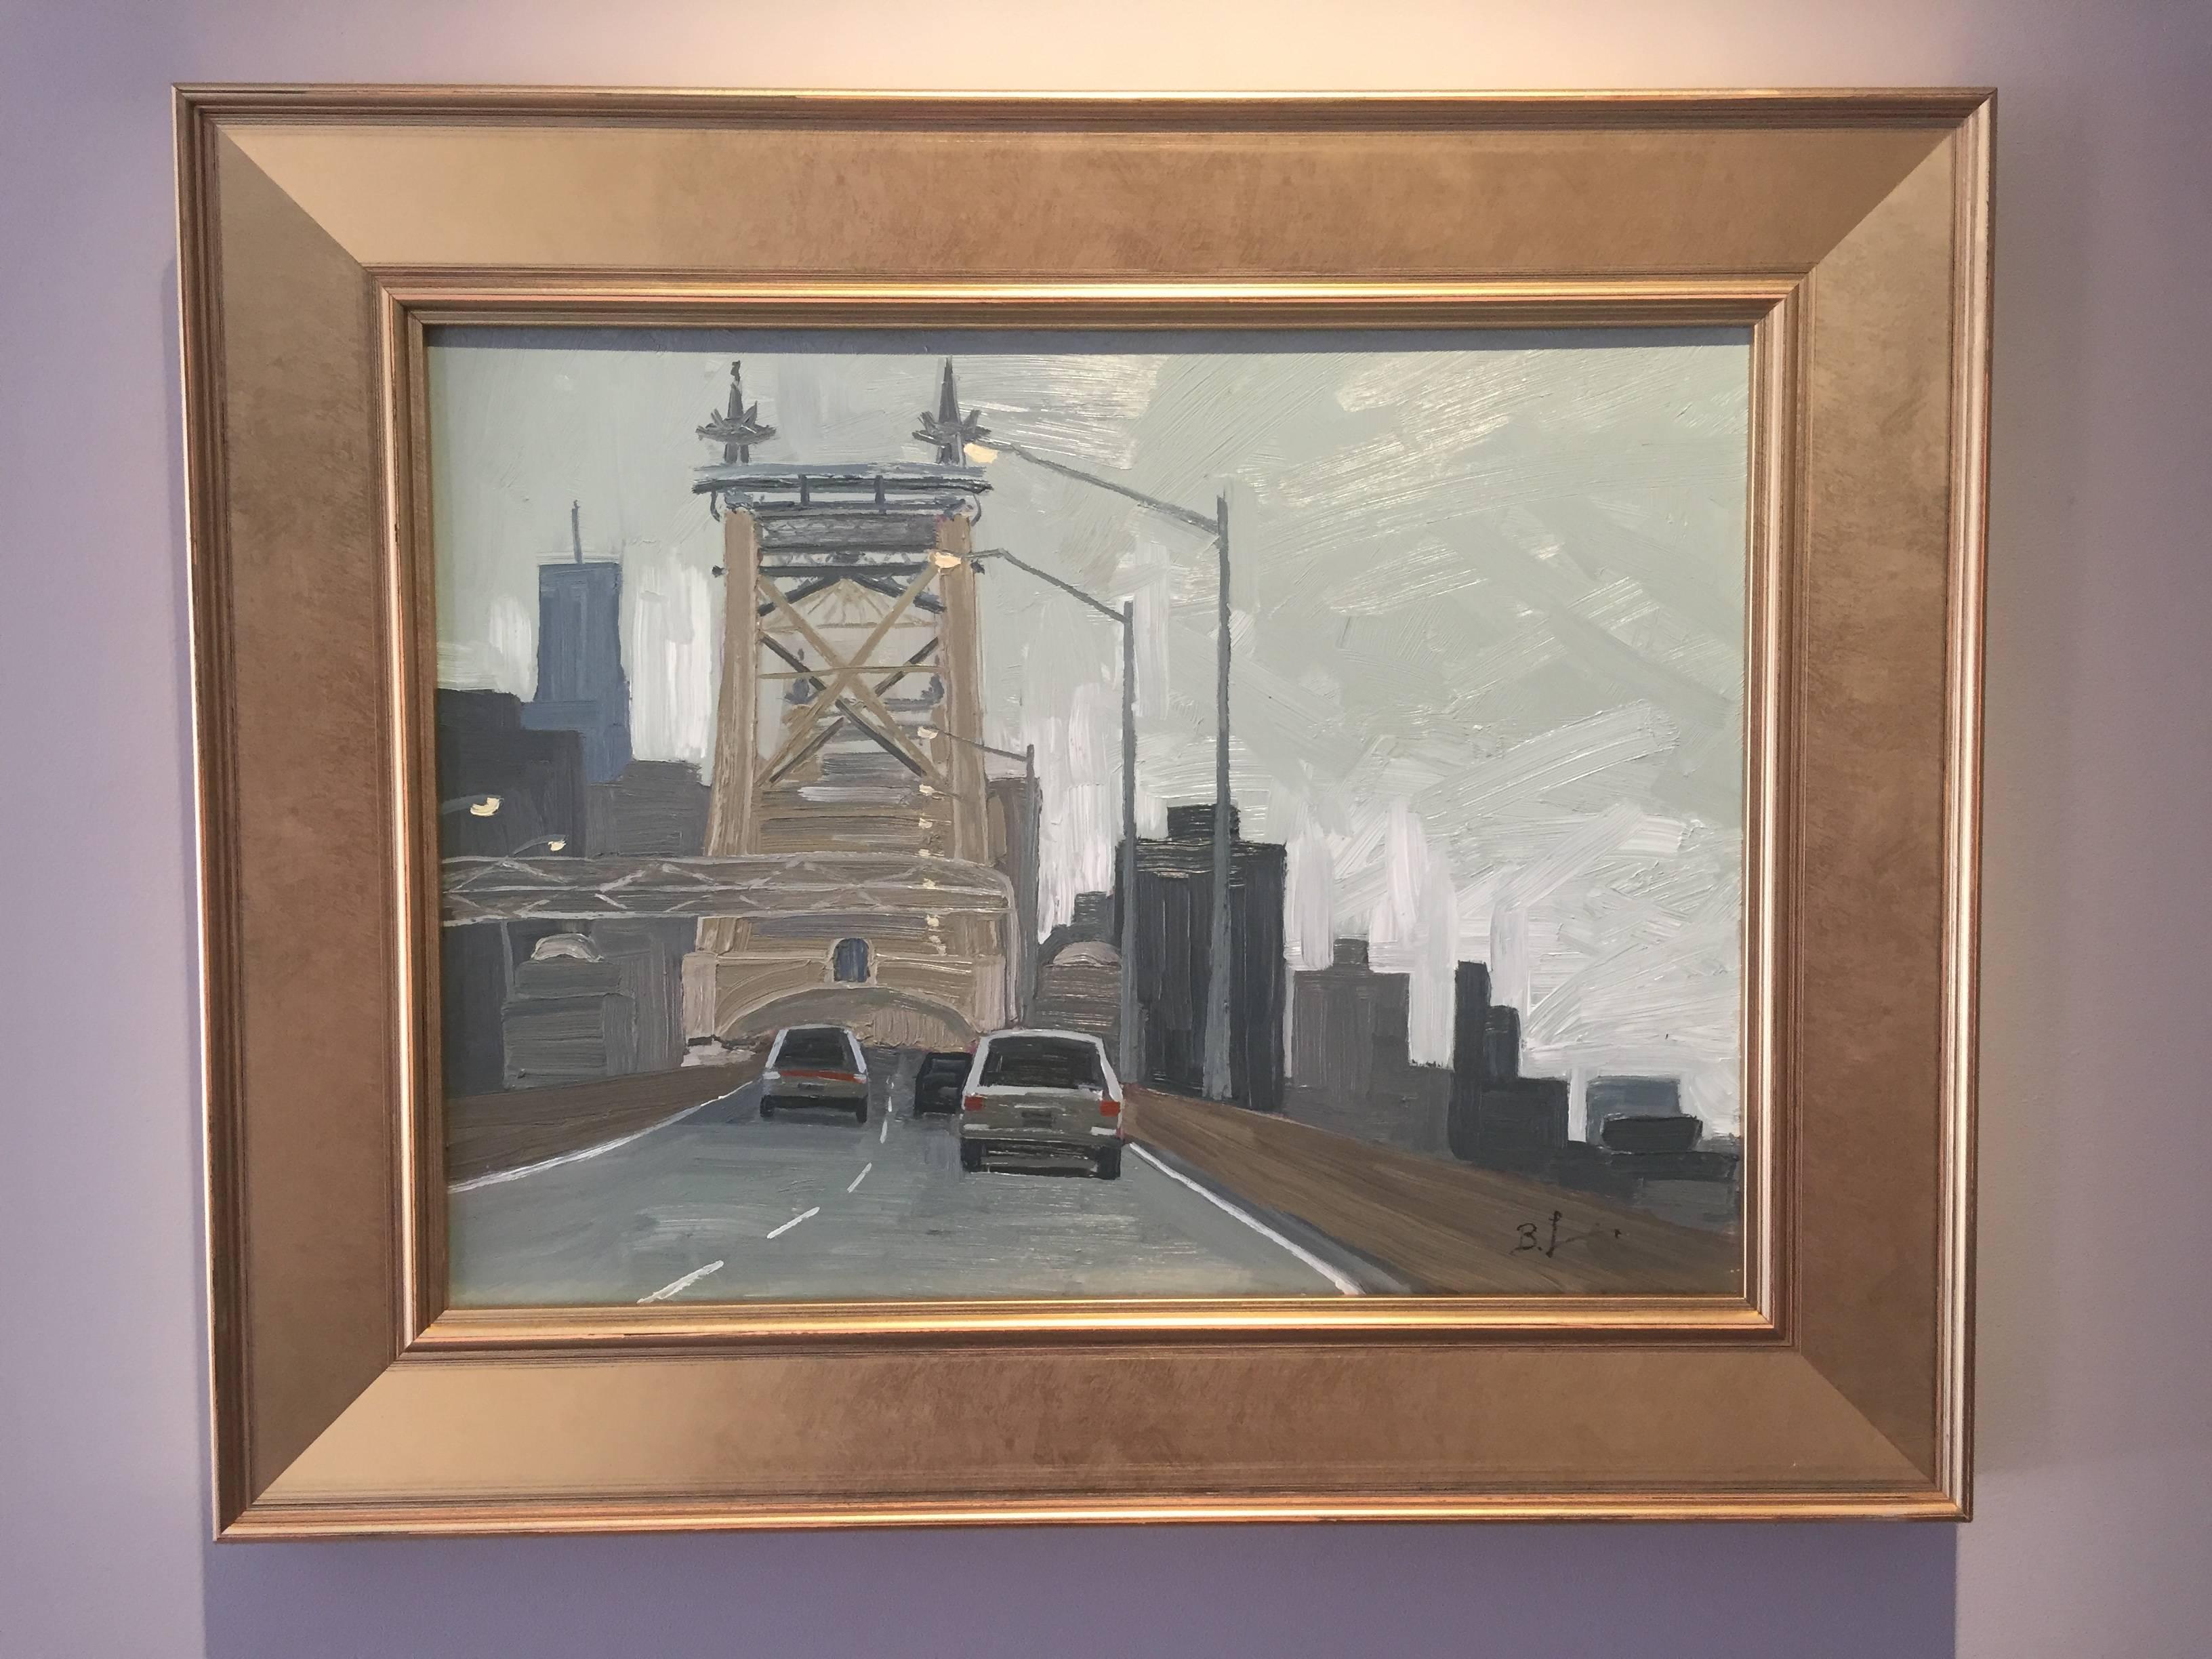 Over the Queensboro - Painting by Benjamin Lussier